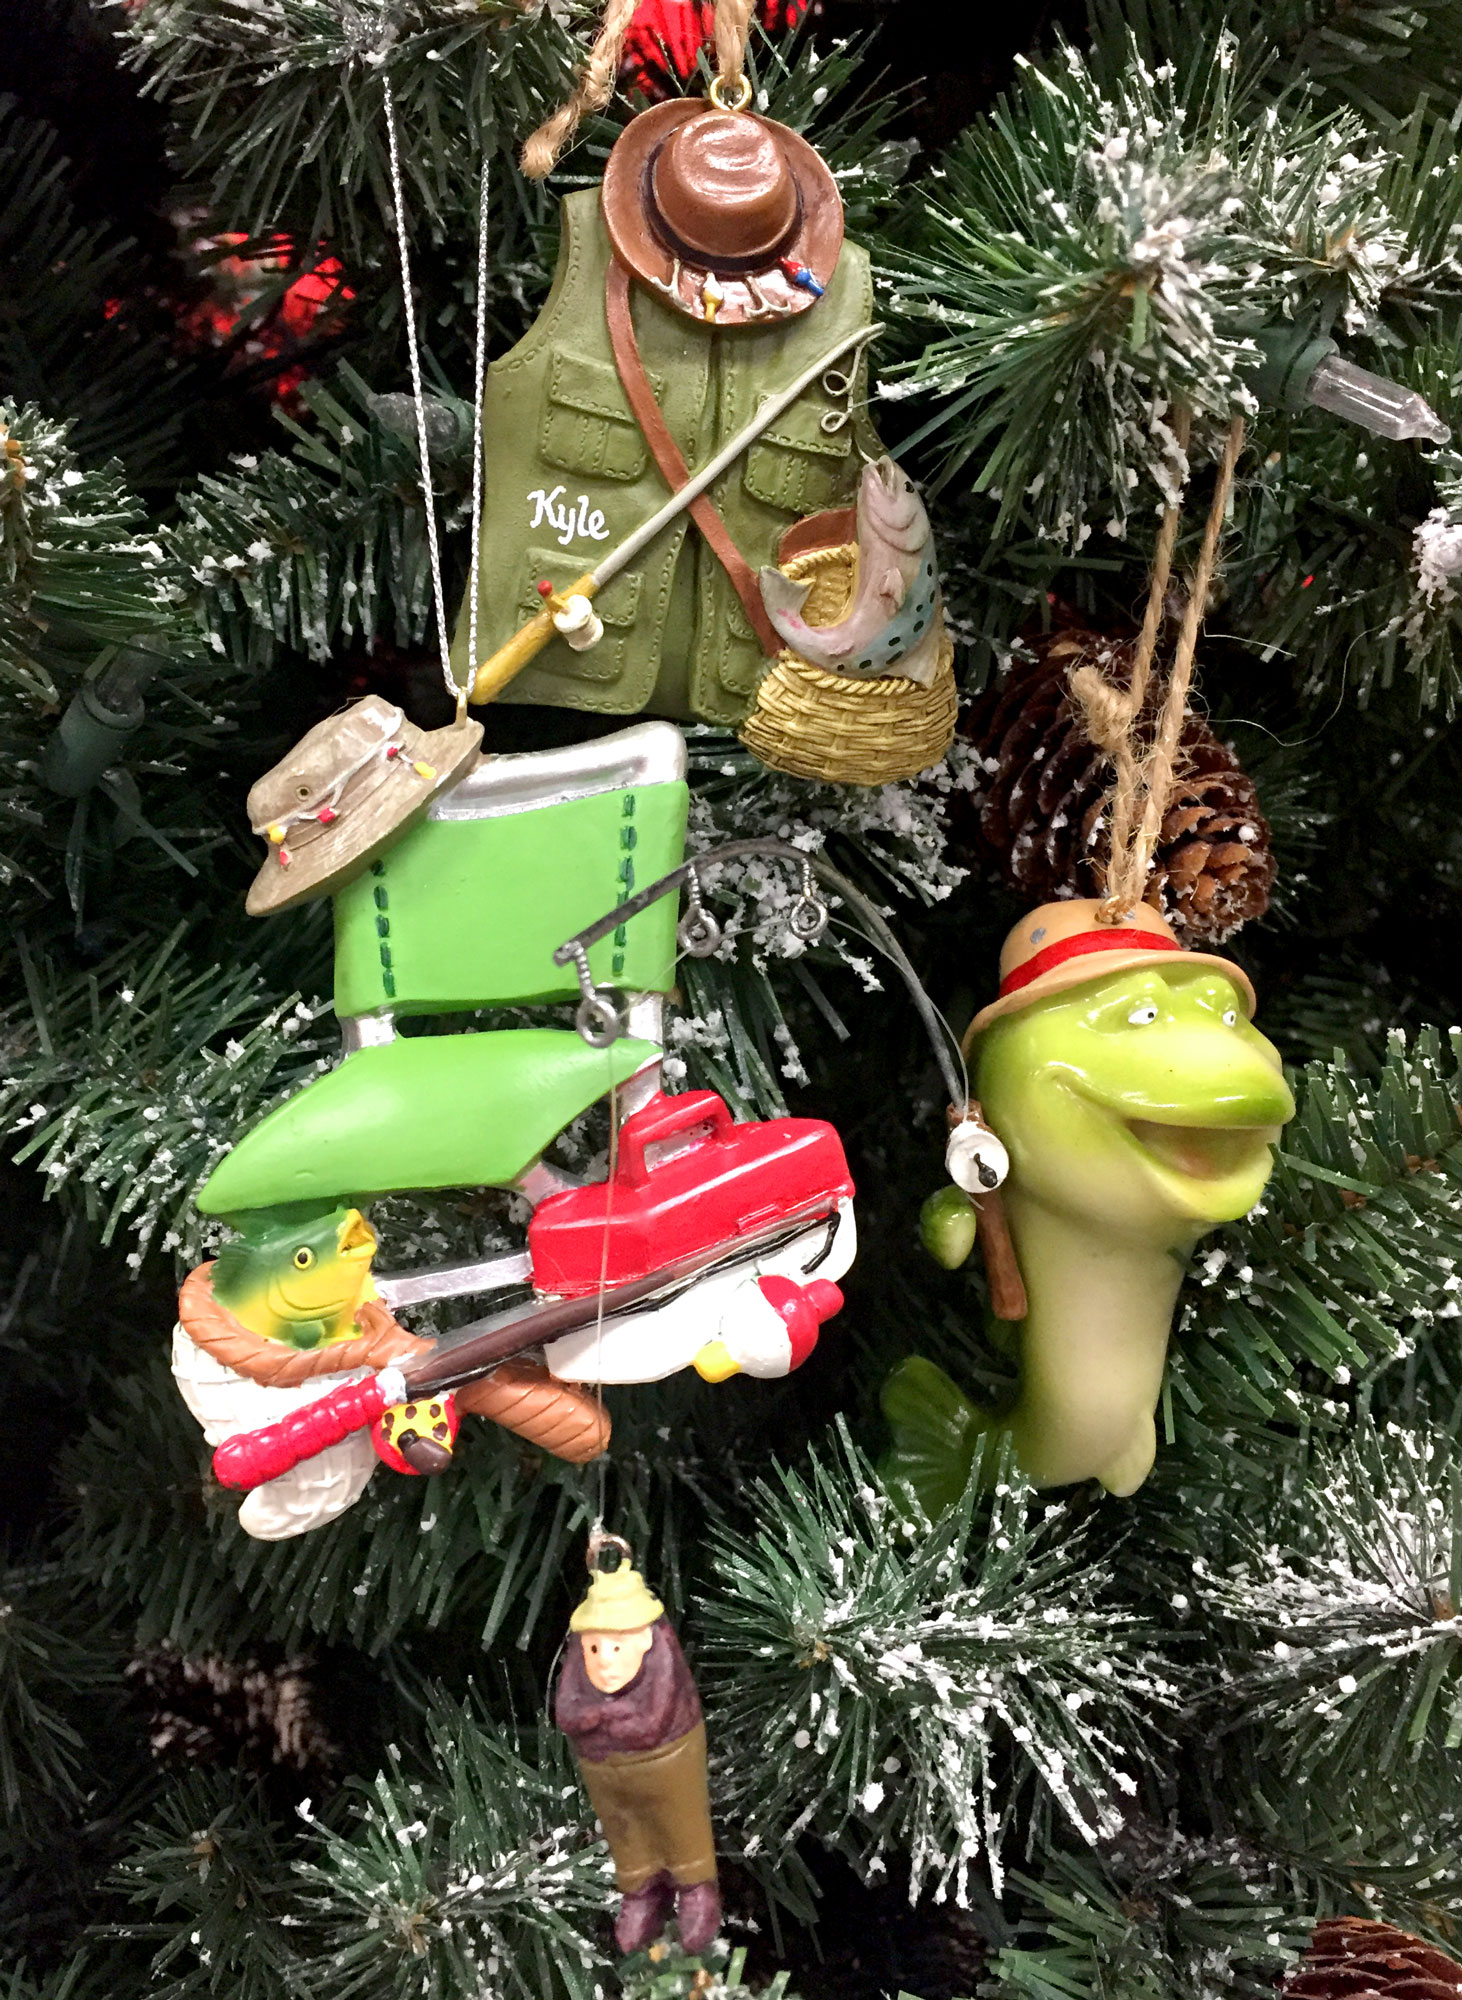 Three fishing ornaments: One with a fishing chair, another with a fisherman's vest, and a third with a large fishing pretending to reel in a human | OrnamentShop.com